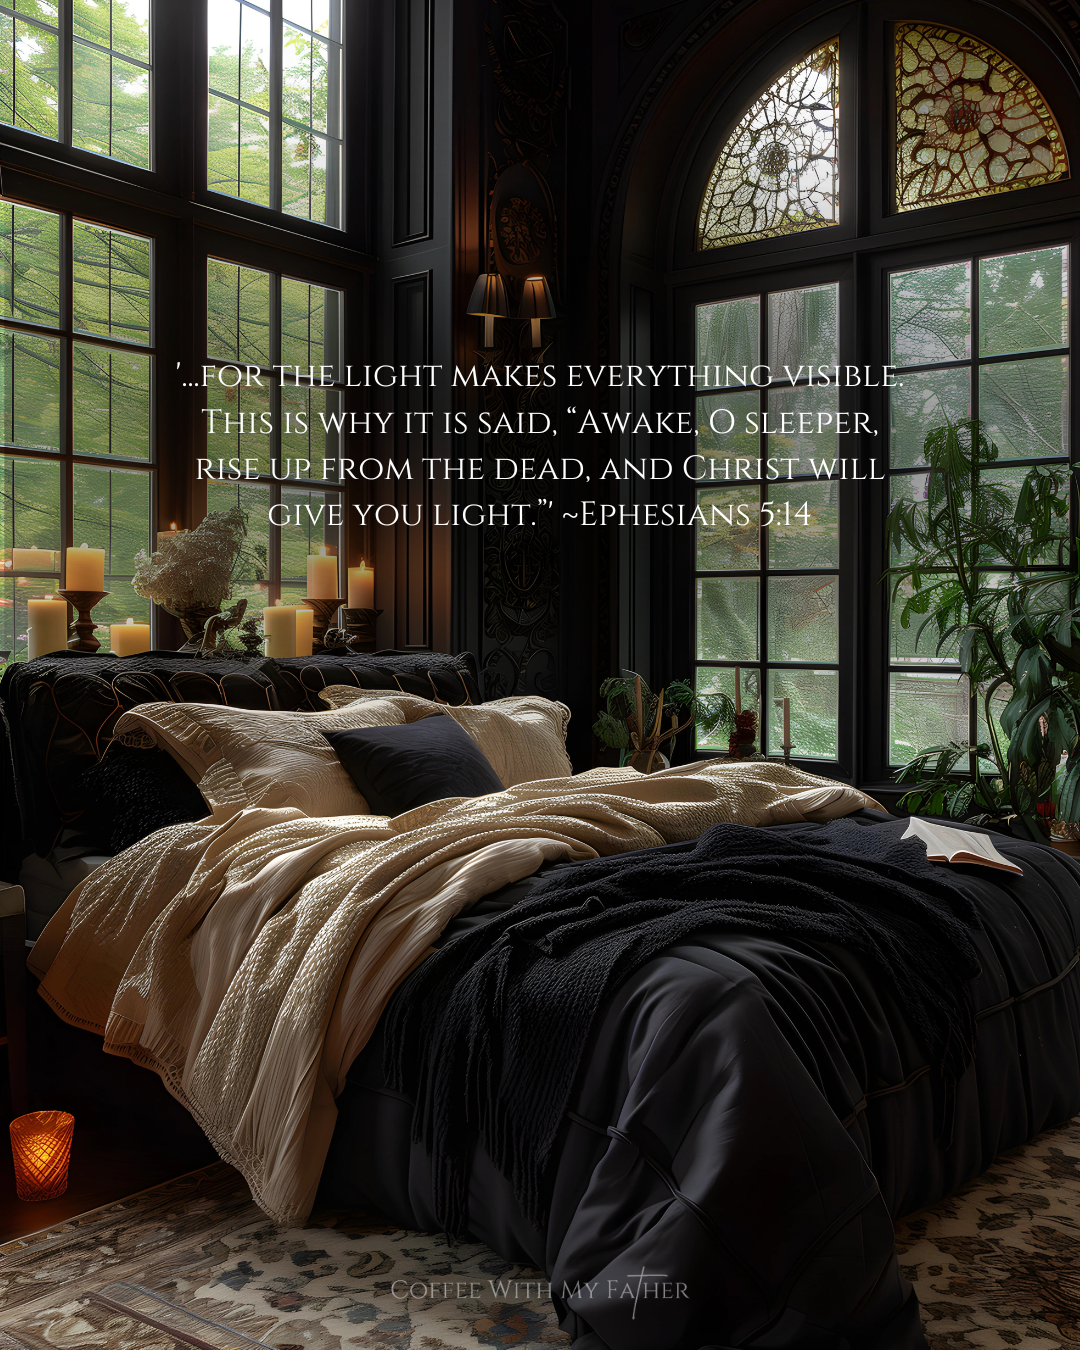 An opulent bedroom with a large bed draped in black and cream linens, flanked by tall windows with stained glass, candles, plants, and an open book, overlaid with a quote from Ephesians 5:14.